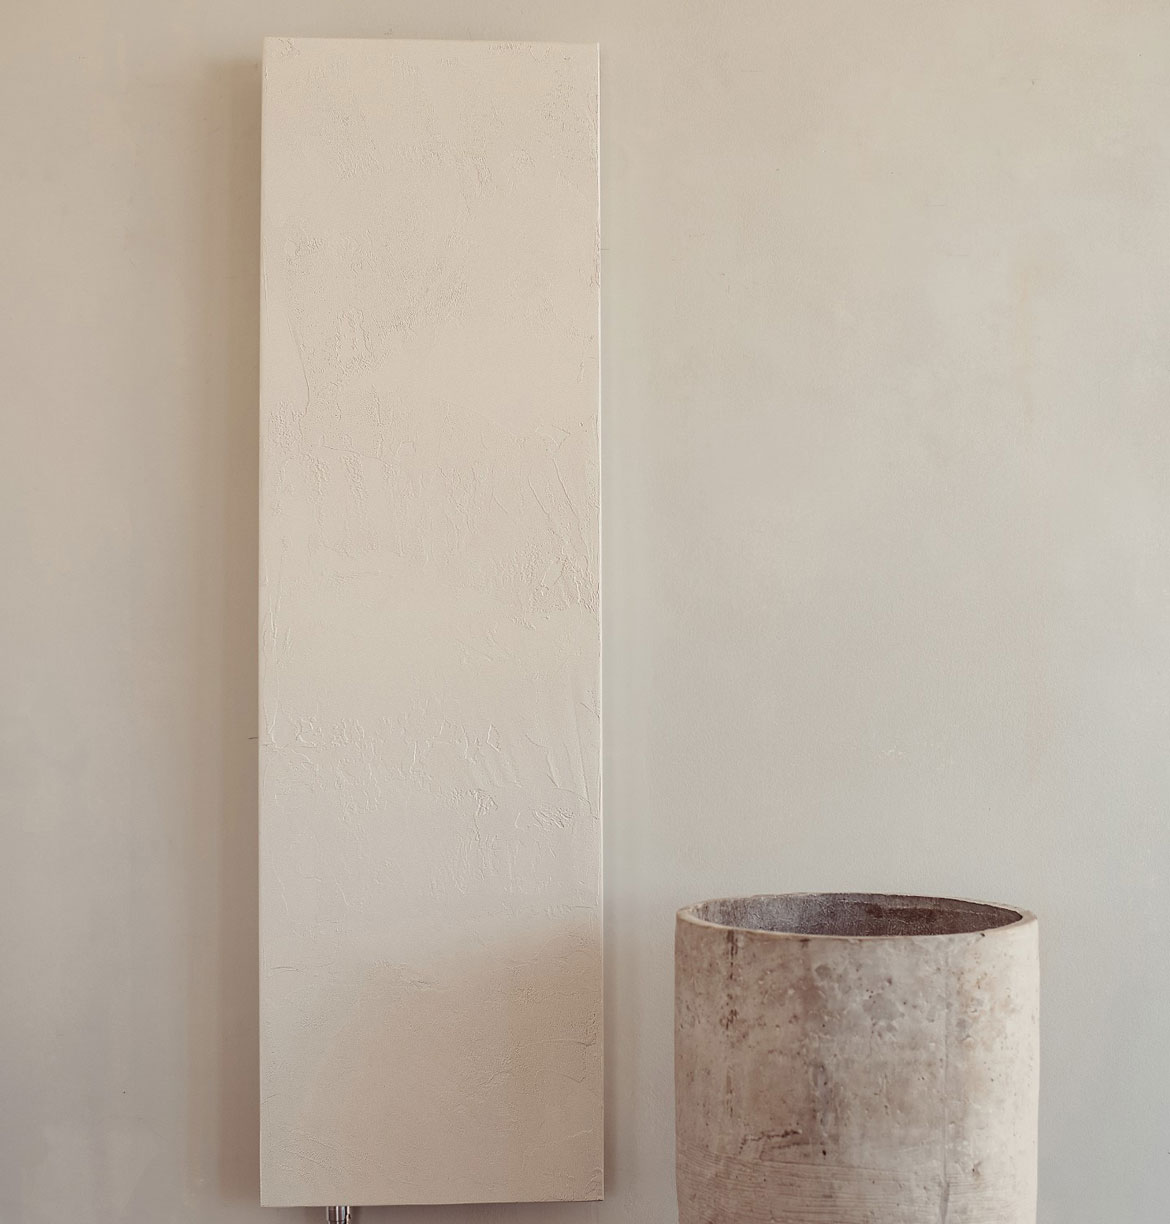 radiator-to-plate-steel-and-resin-effect-stone-milo-graziano